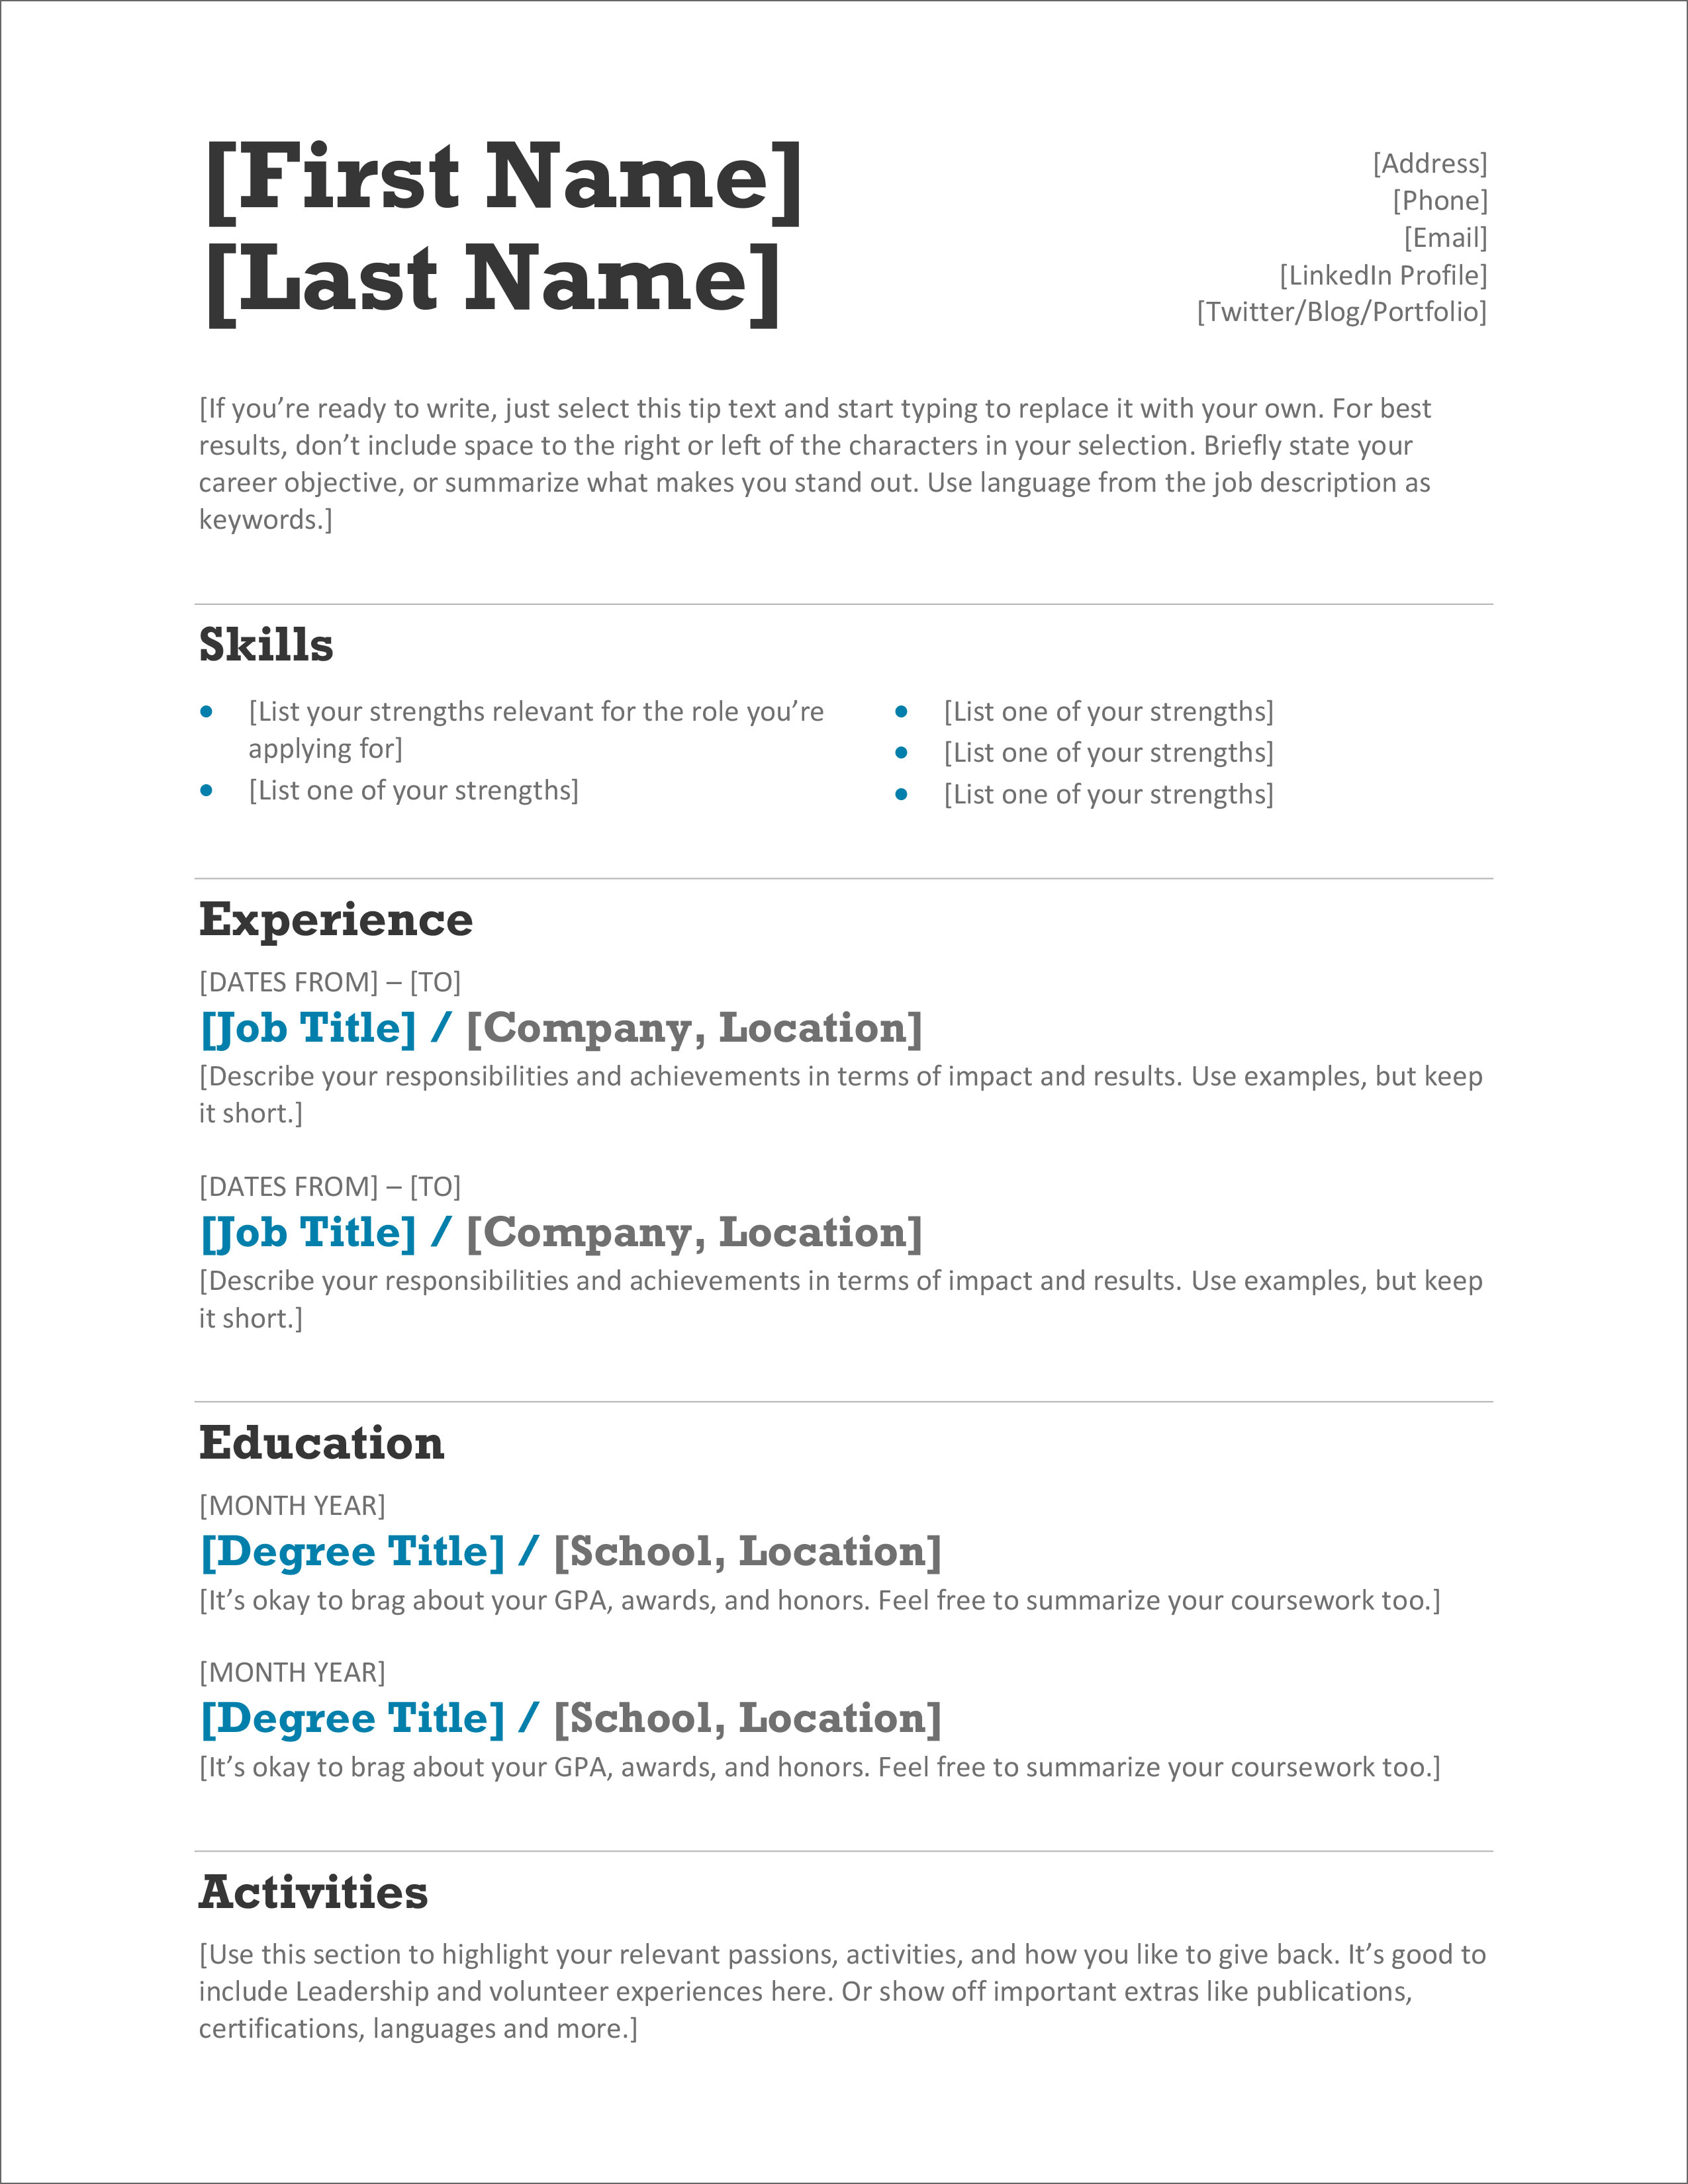 45 Free Modern Resume / Cv Templates – Minimalist, Simple With How To Make A Cv Template On Microsoft Word